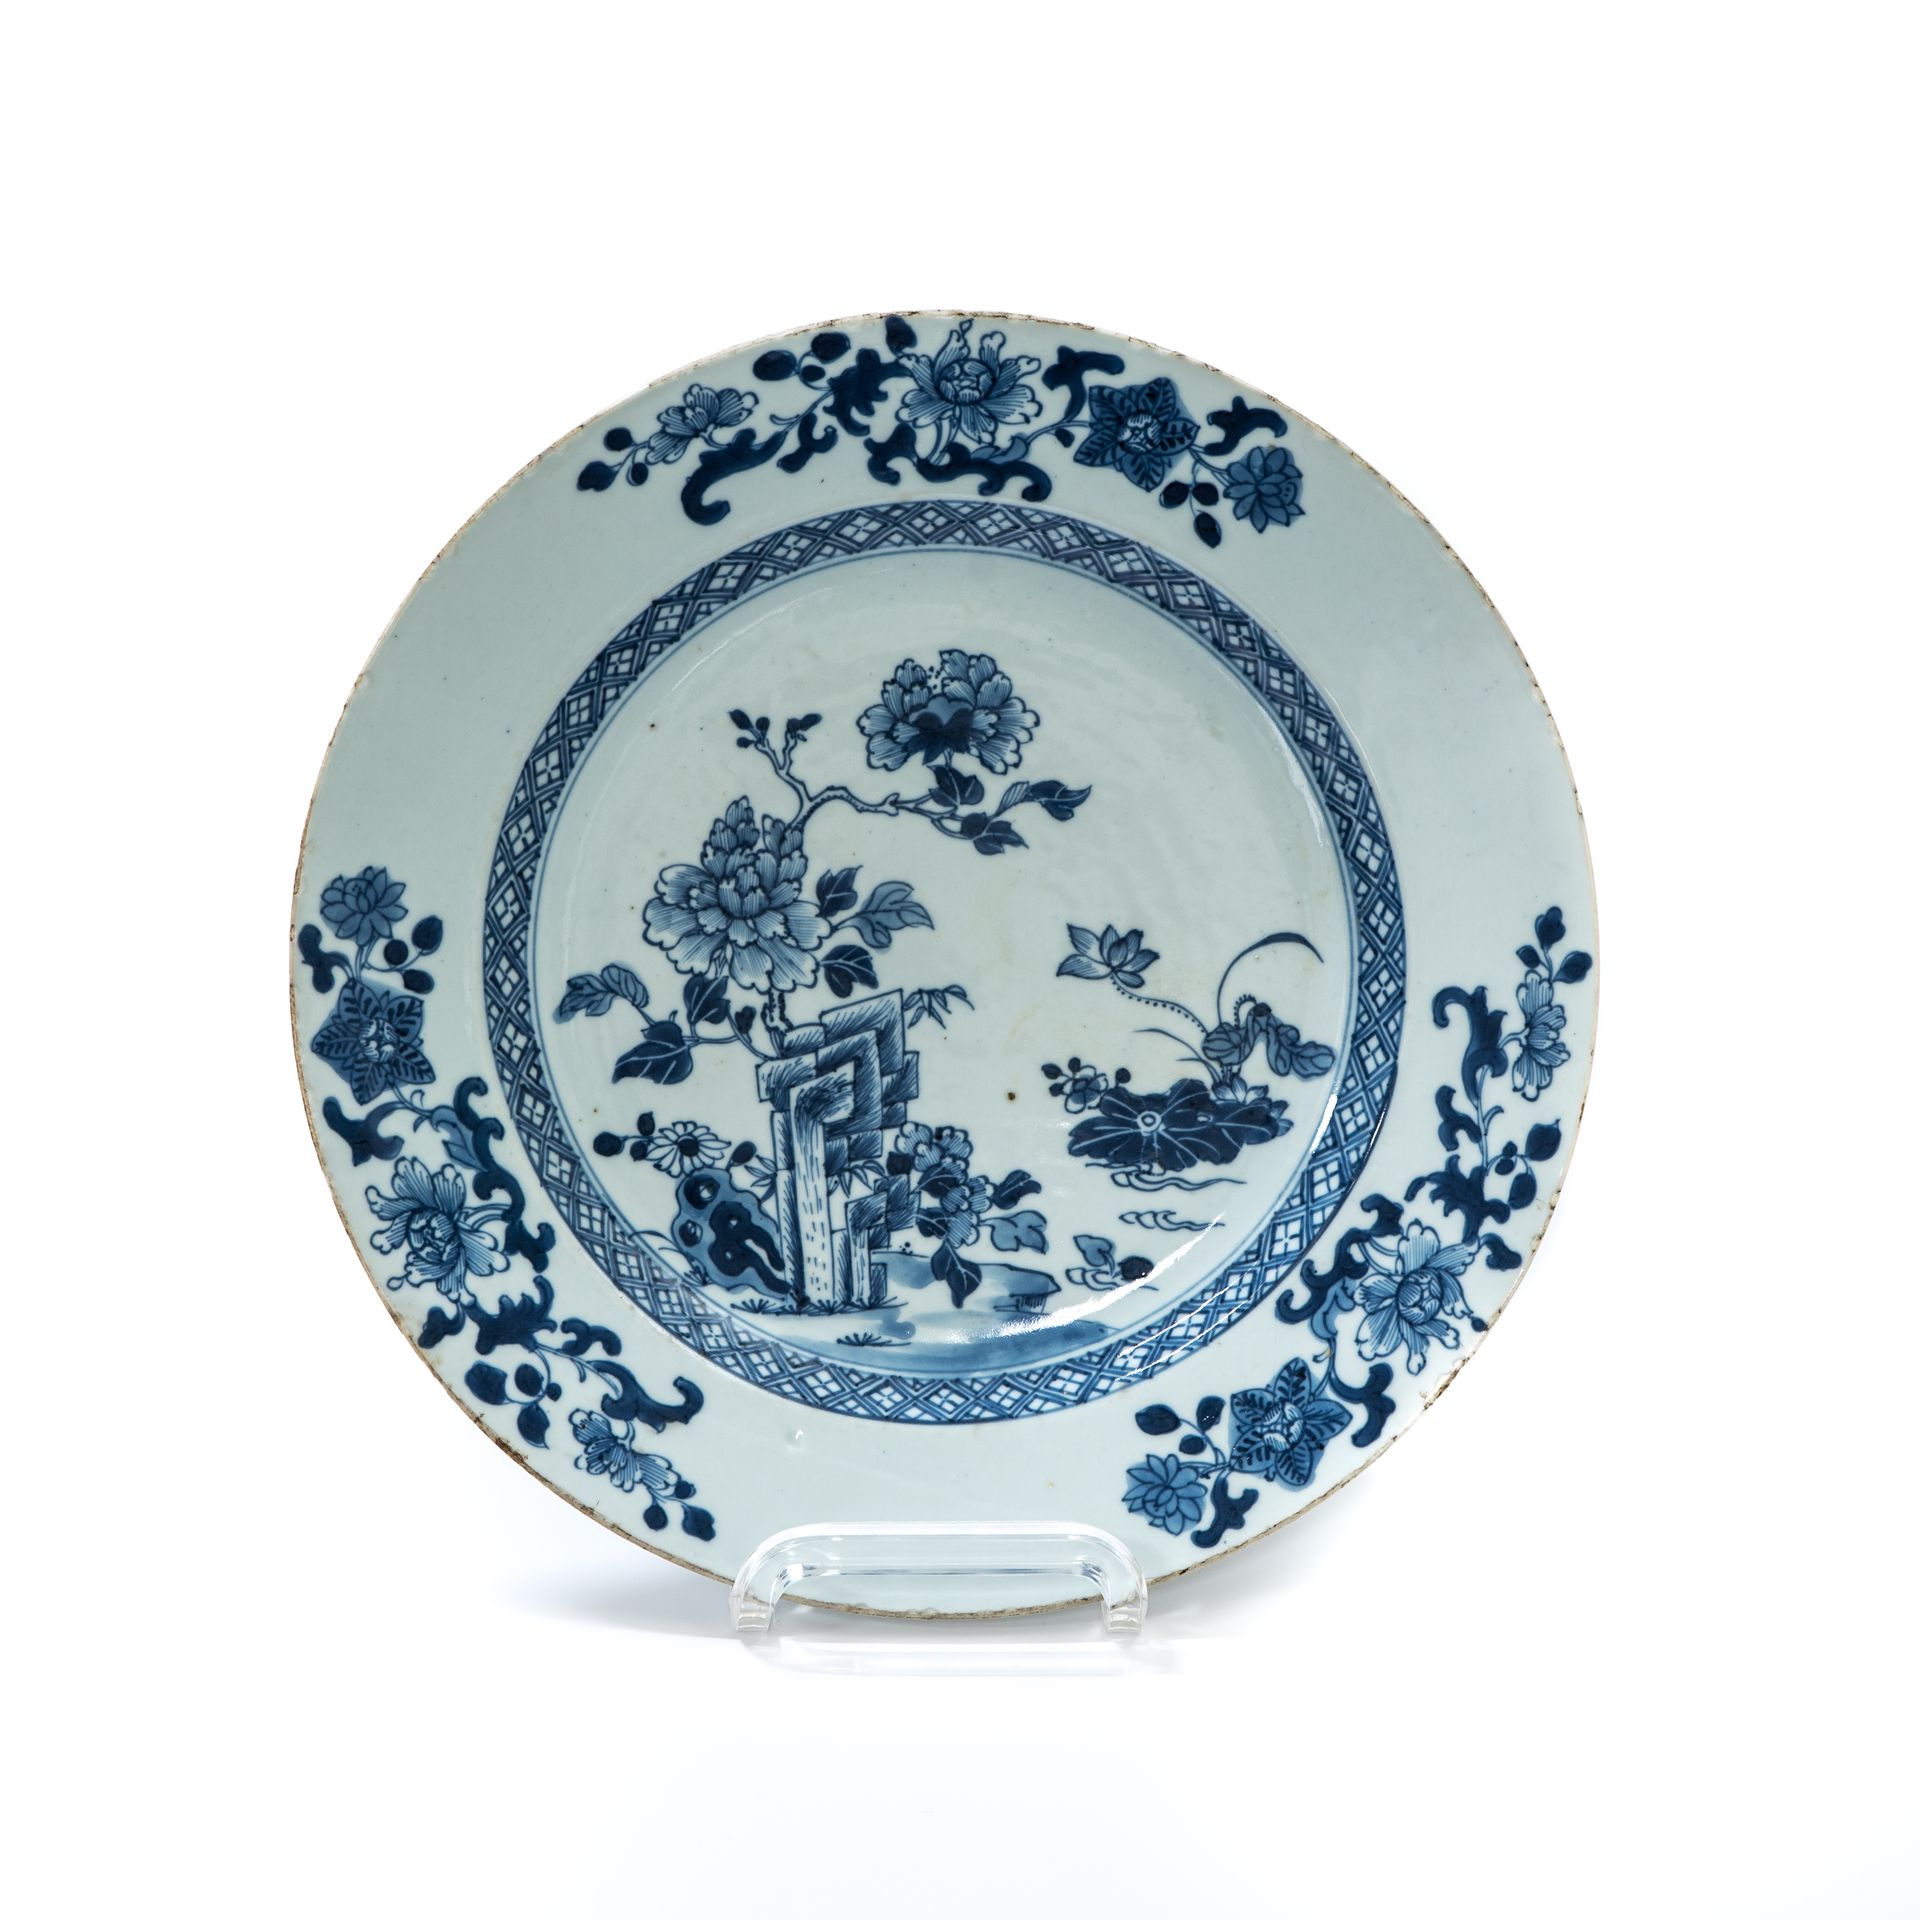 Null Plate

CHINA, INDIA COMPANY - QIANLONG ERA (1736-1795)

Porcelain with blue&hellip;